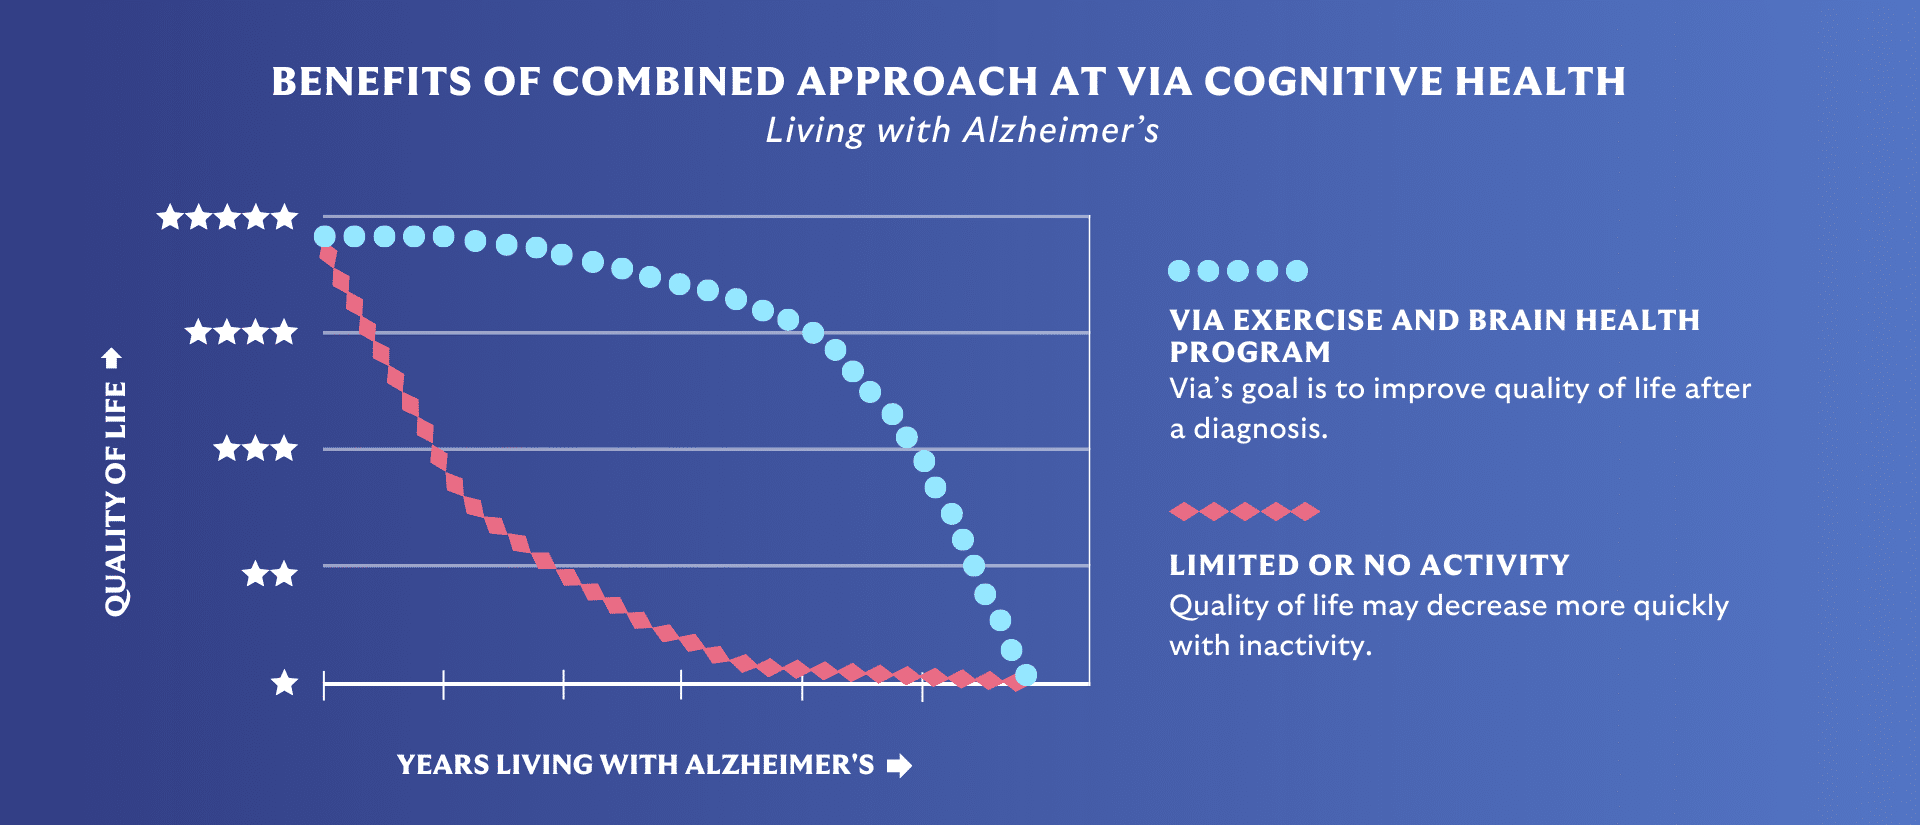 _BENEFITS OF COMBINED APPROACH AT VIA COGNITIVE HEALTH (1)